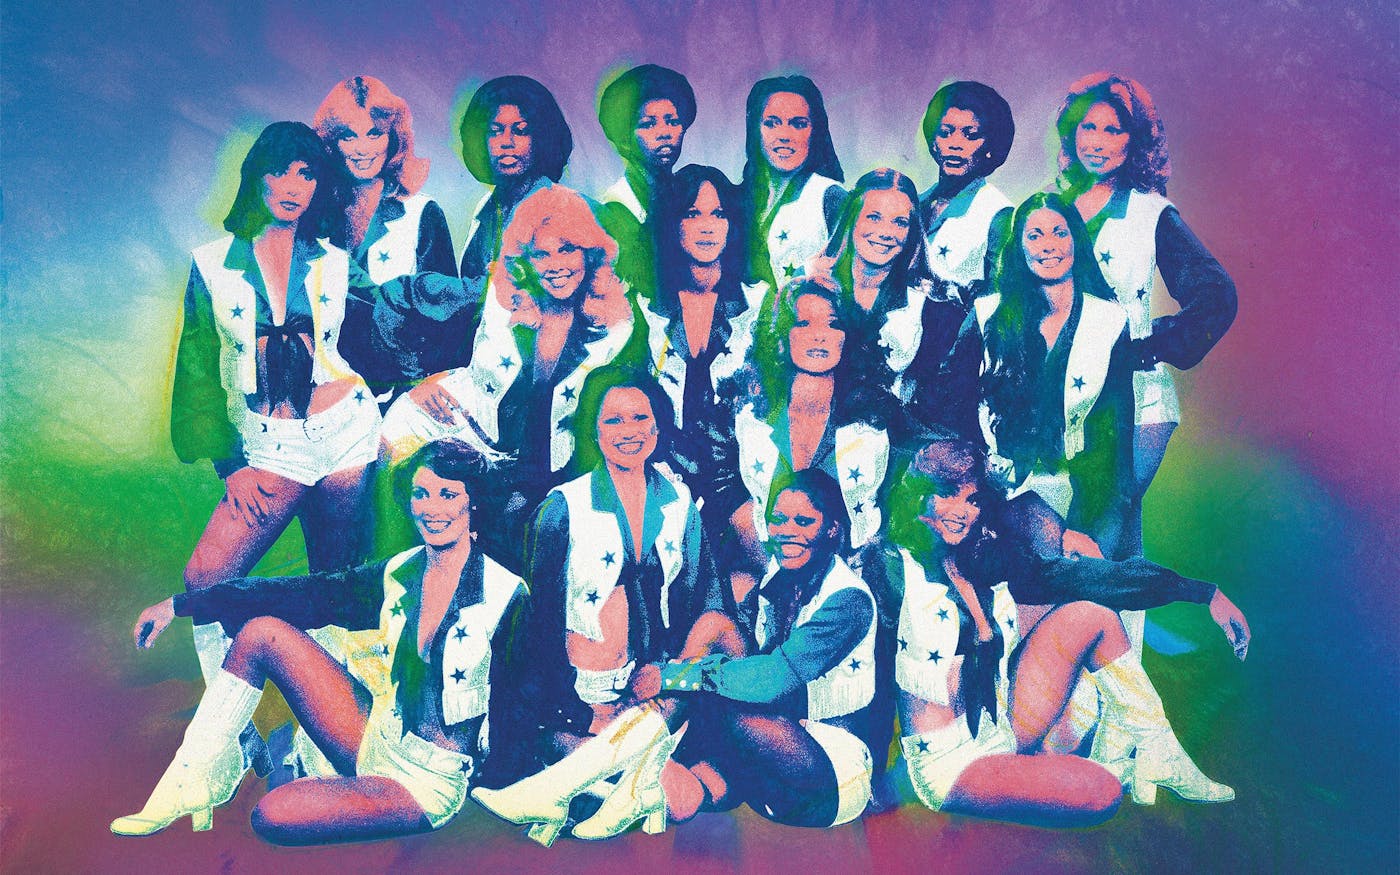 Petit Small Tits School - Sex, Scandal, and Sisterhood: Fifty Years of the Dallas Cowboys Cheerleaders